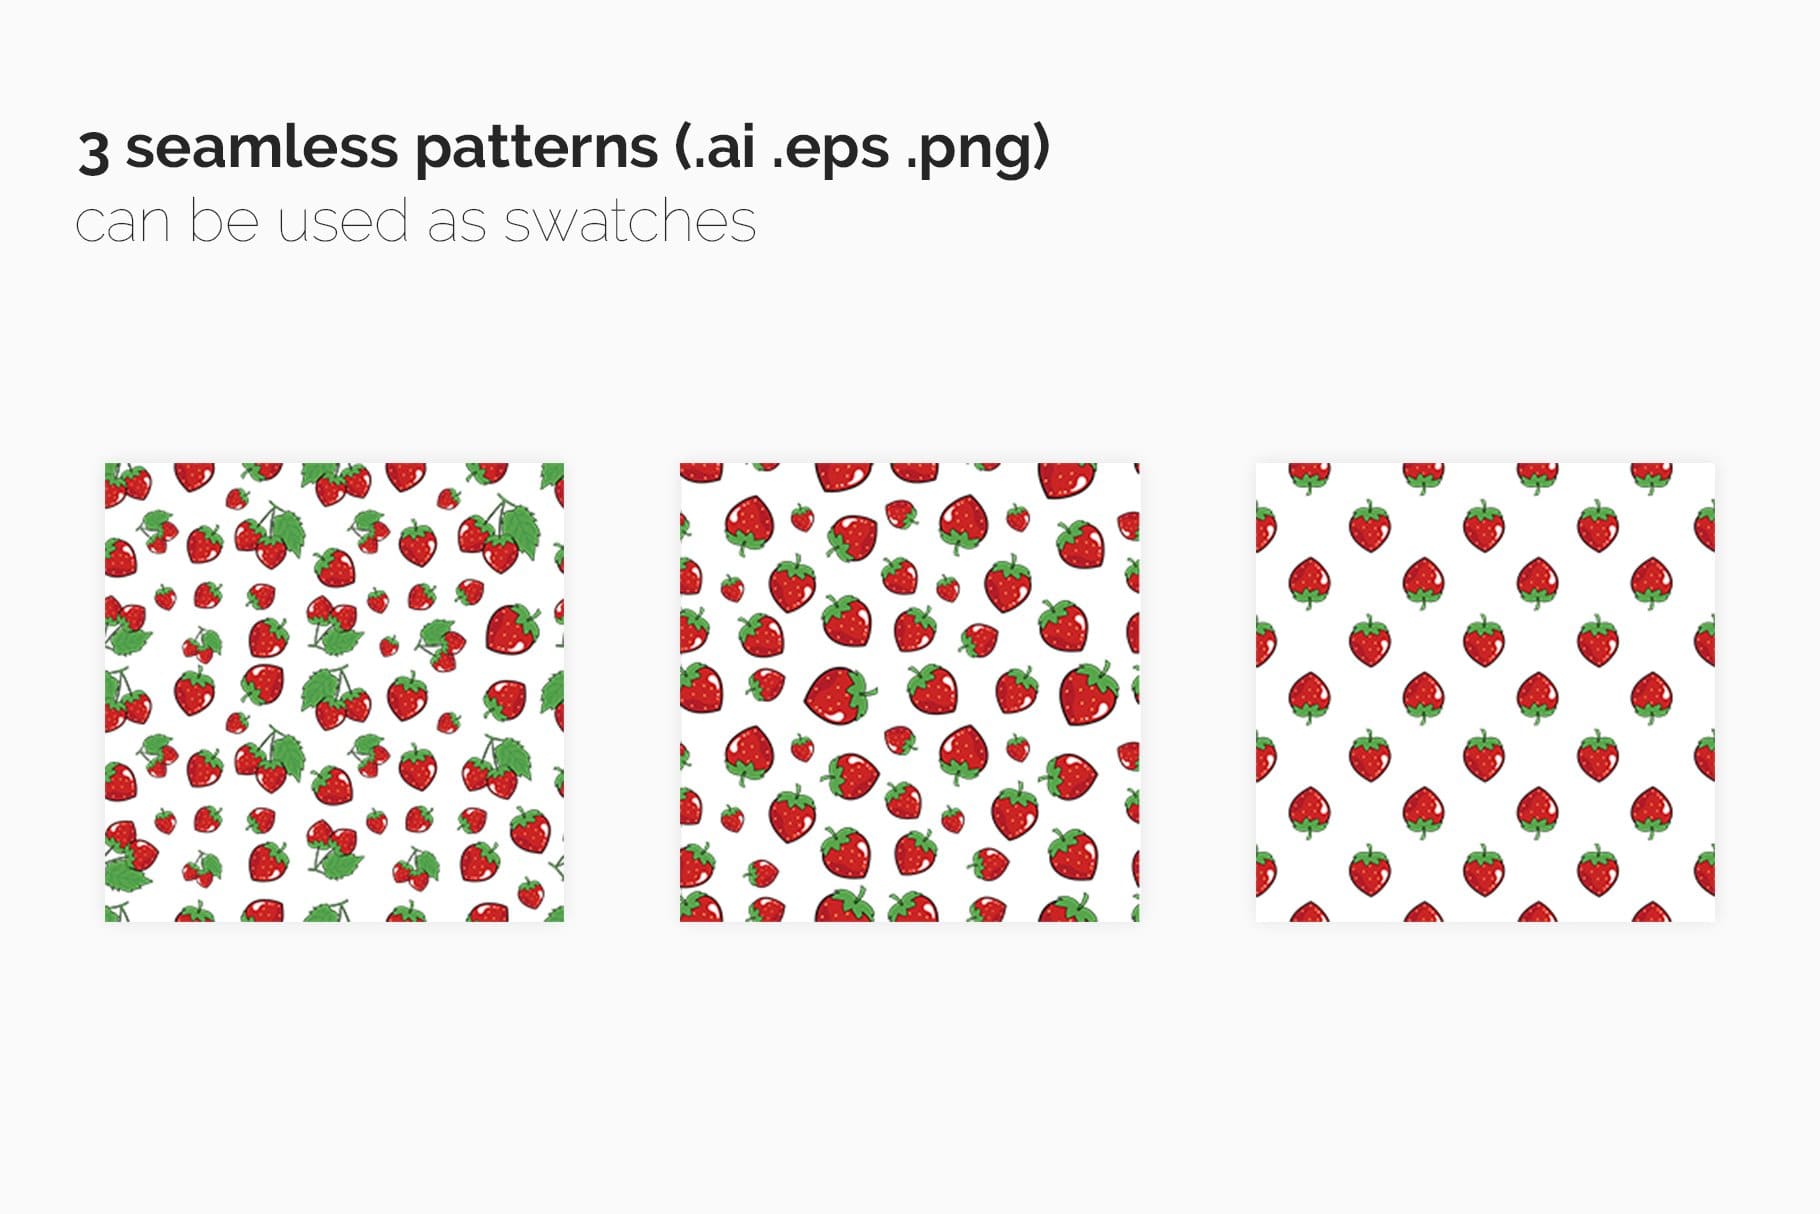 3 seamless patterns can be used as swatches.